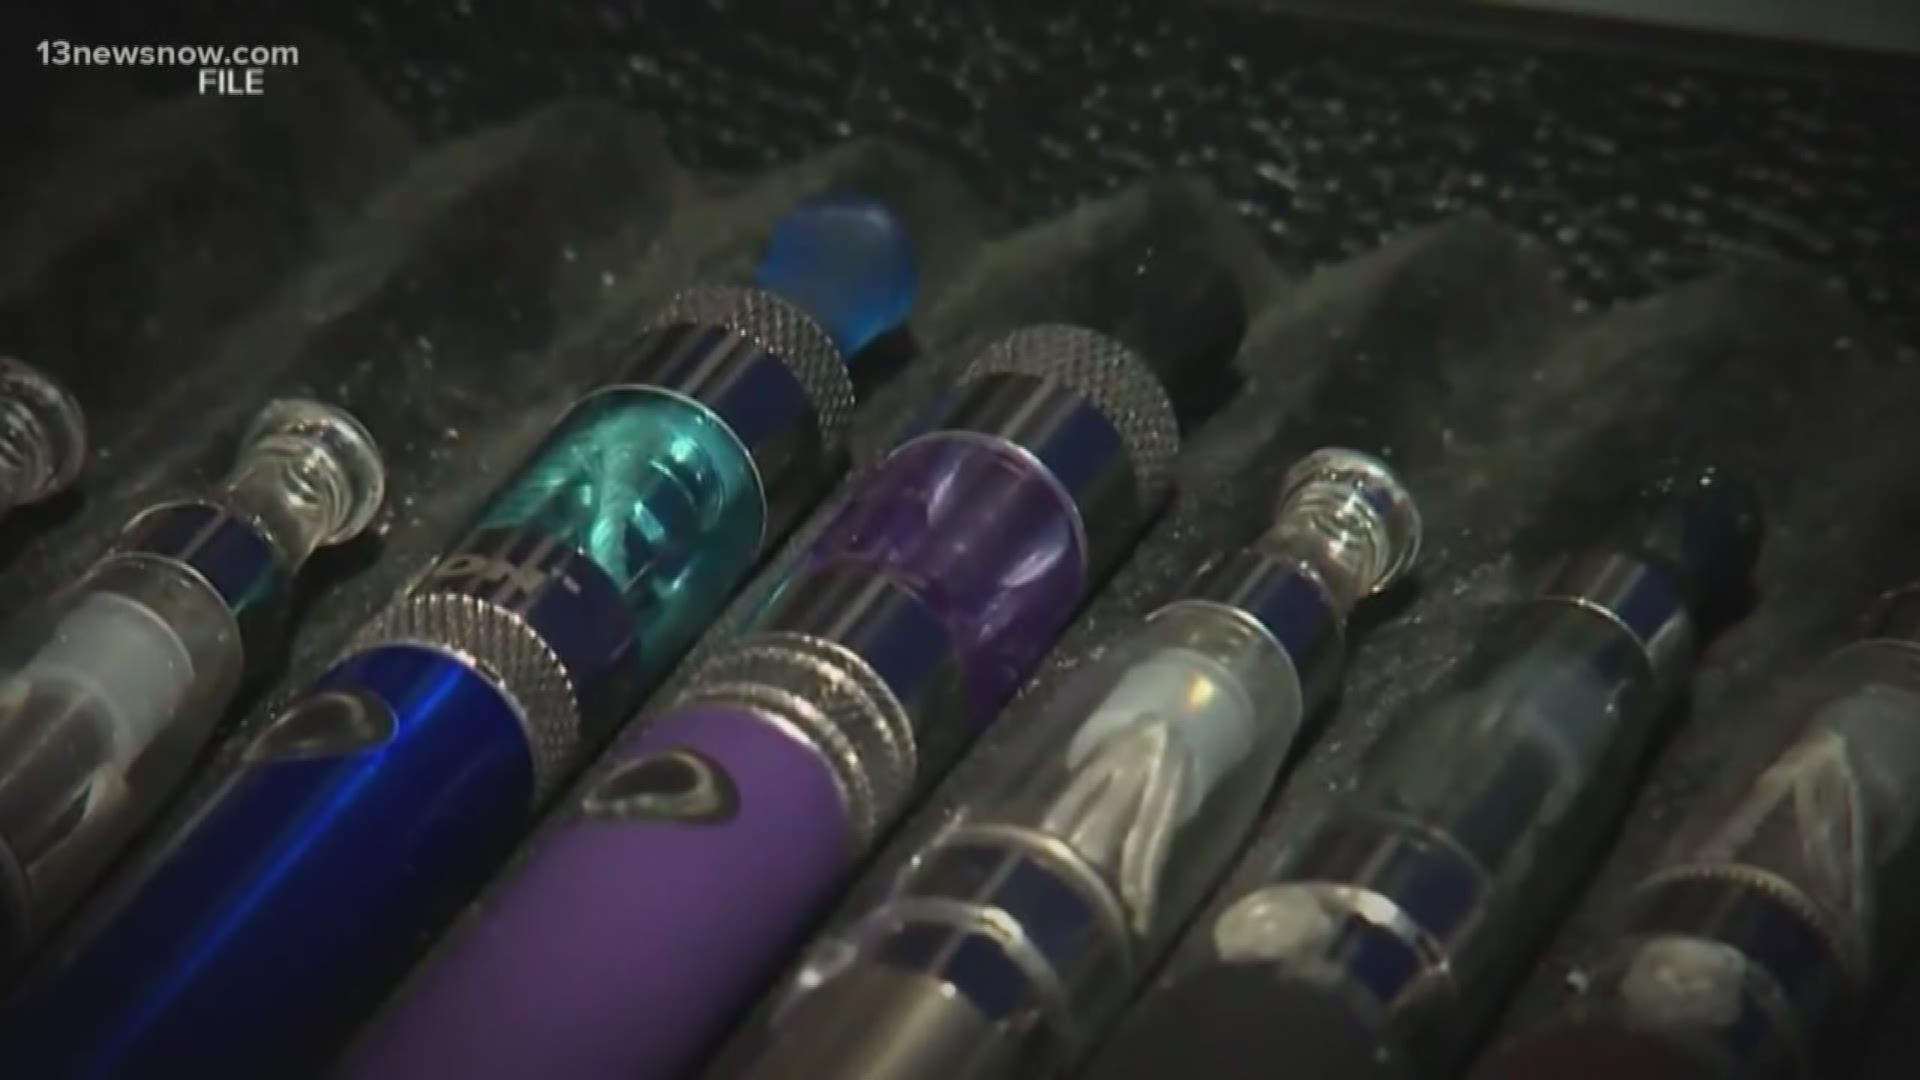 Local doctors and even the Surgeon general called vaping an epidemic. In Virginia, there are 33 confirmed cases of severe lung injury.